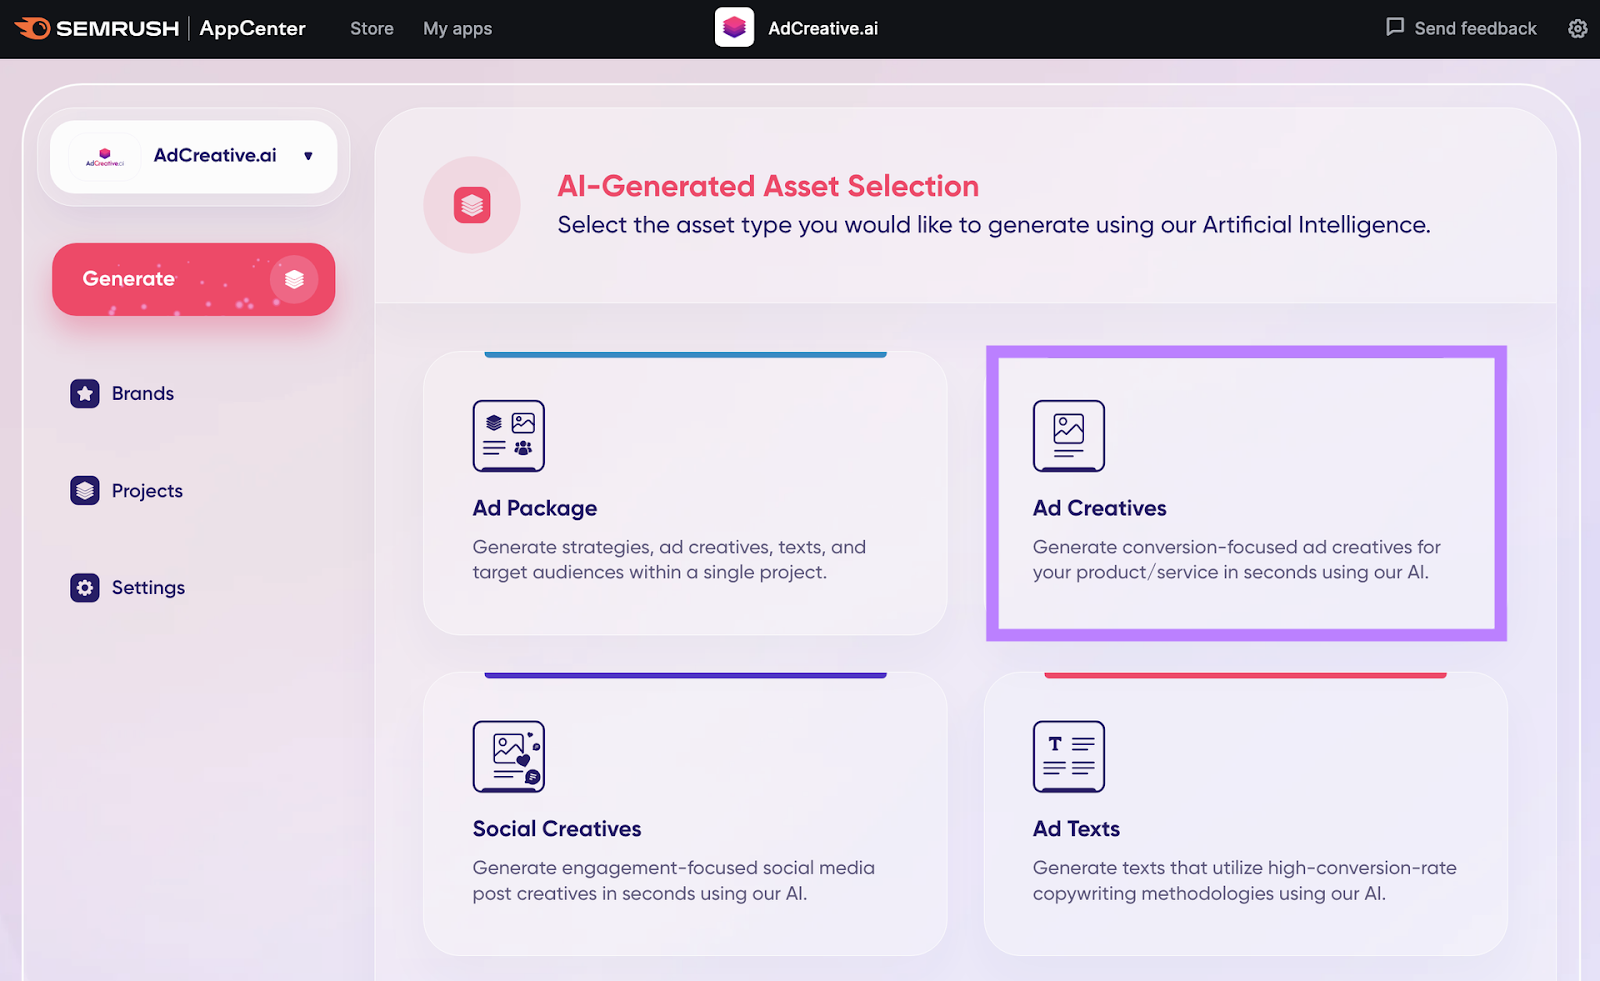 AdCreative.ai homepage with the AI-Generated Asset Selection menu open and the Ad Creatives option selected